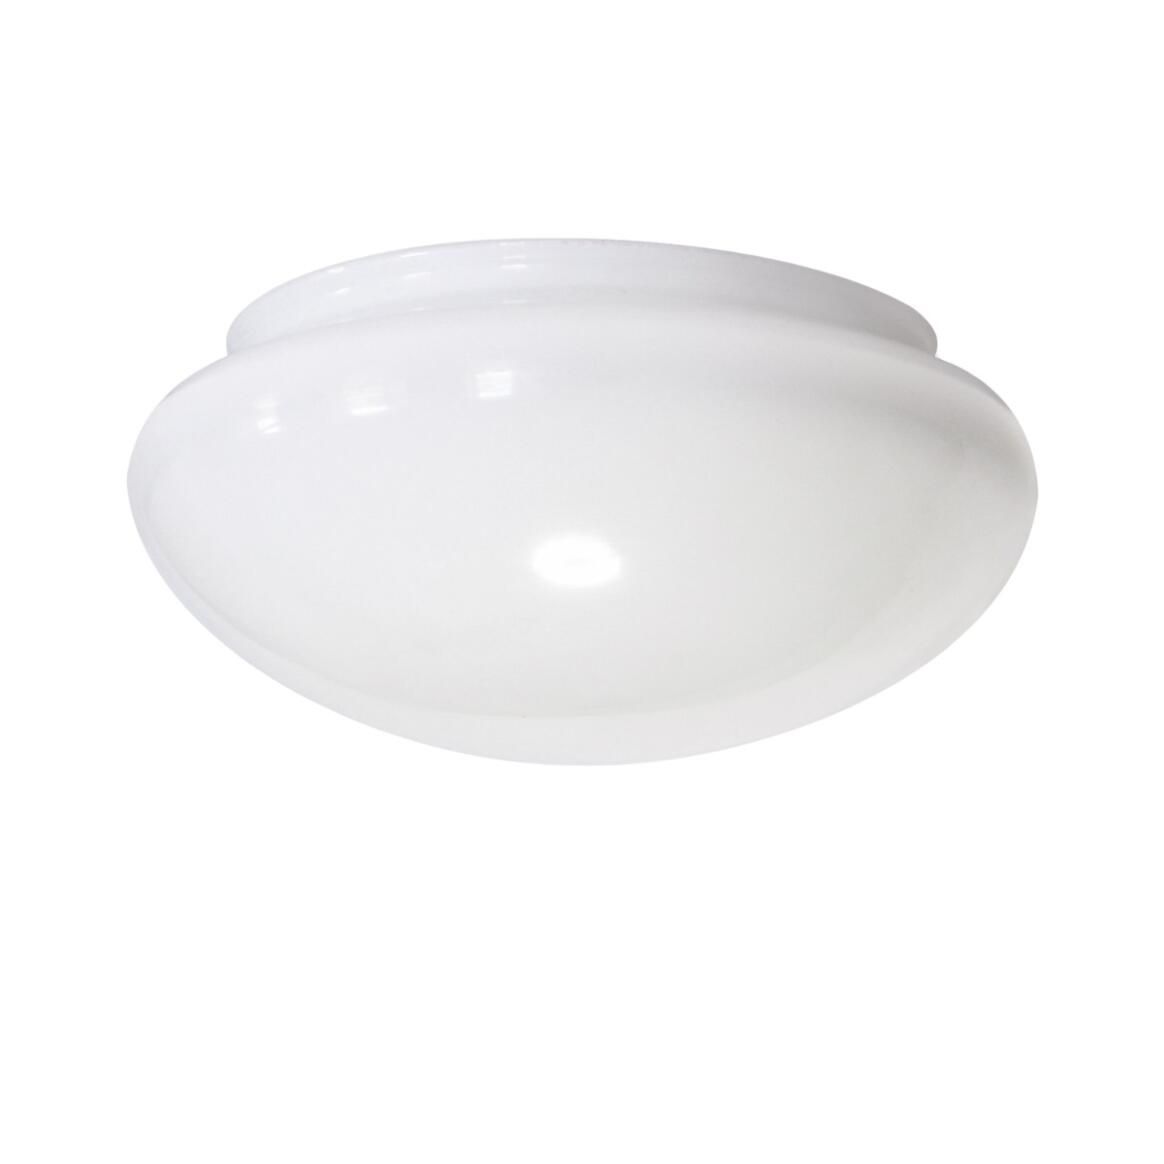 Small flush ceiling fitting glass lamp shade main product image